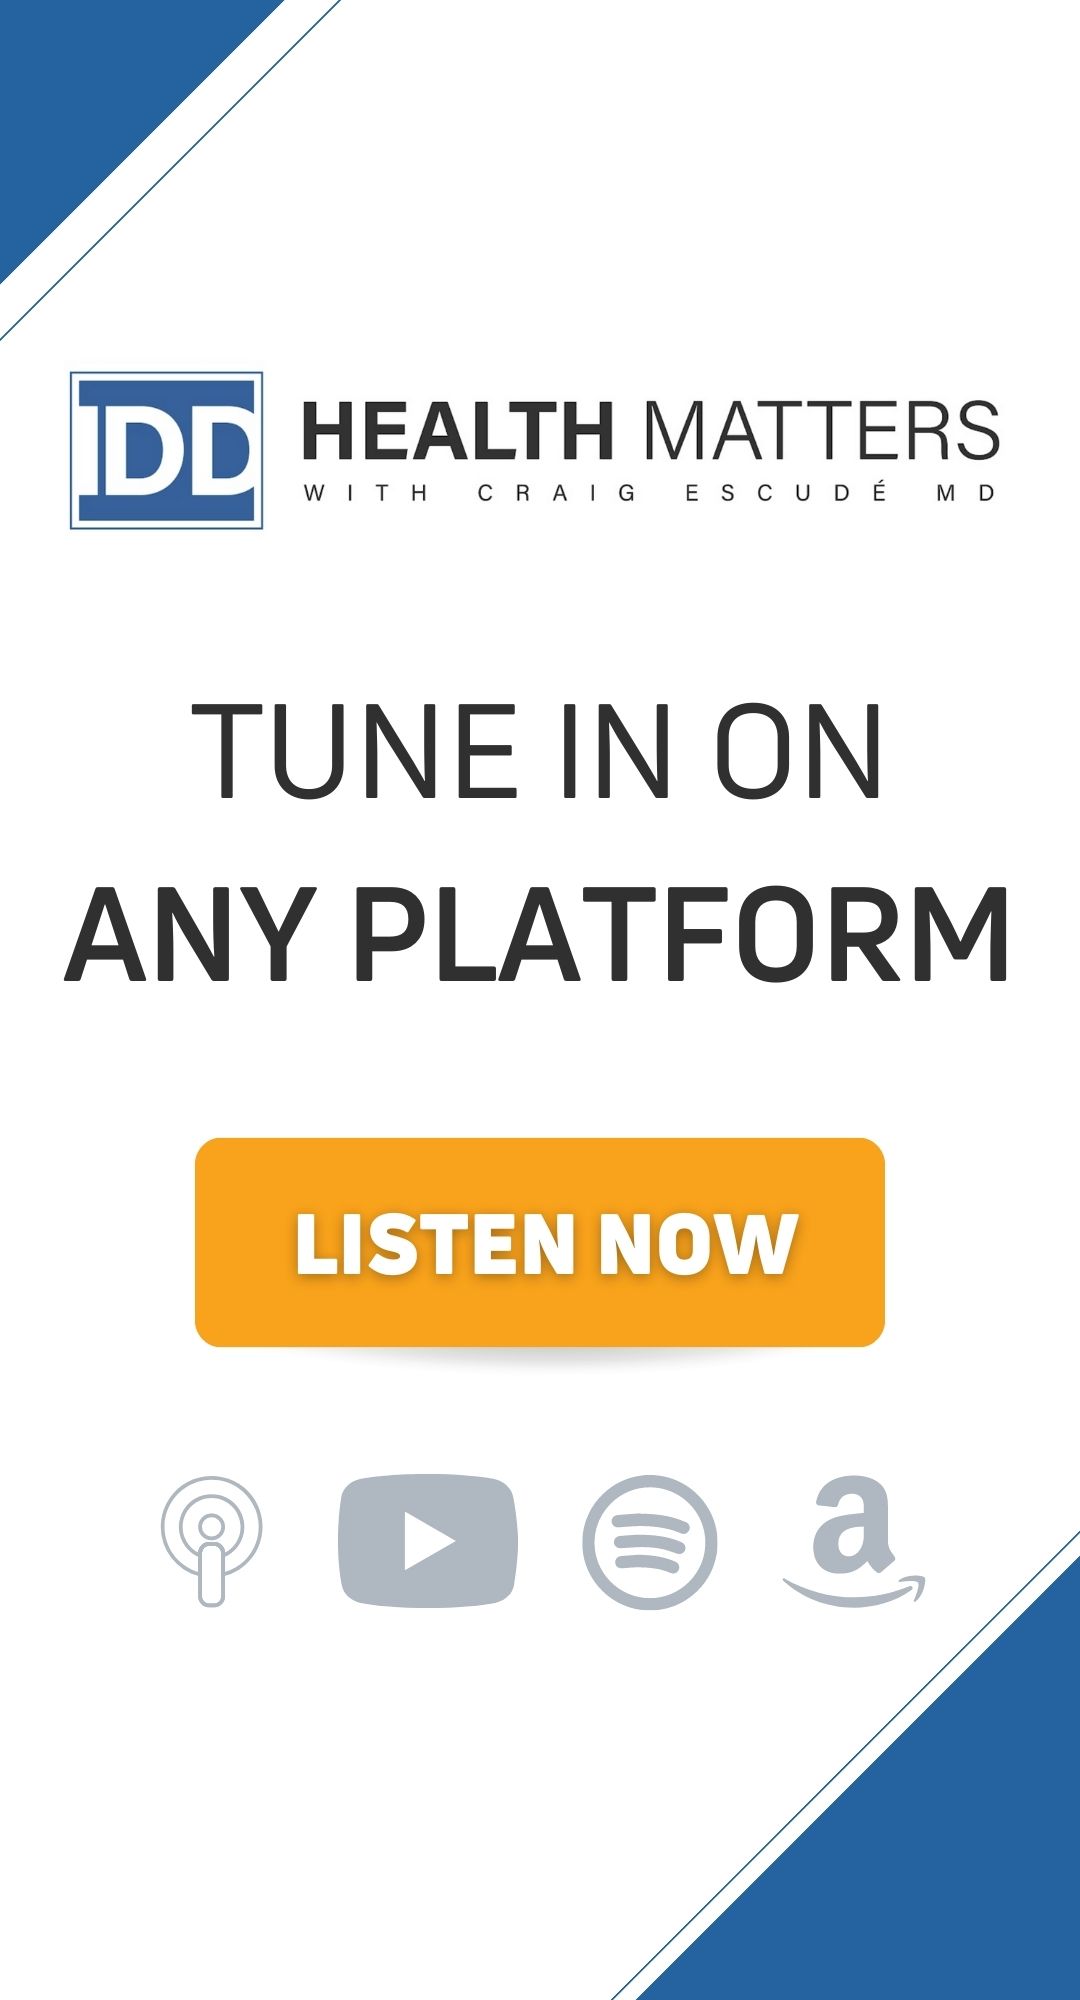 IDD Health Matters Podcast with Craig Escudé, MD